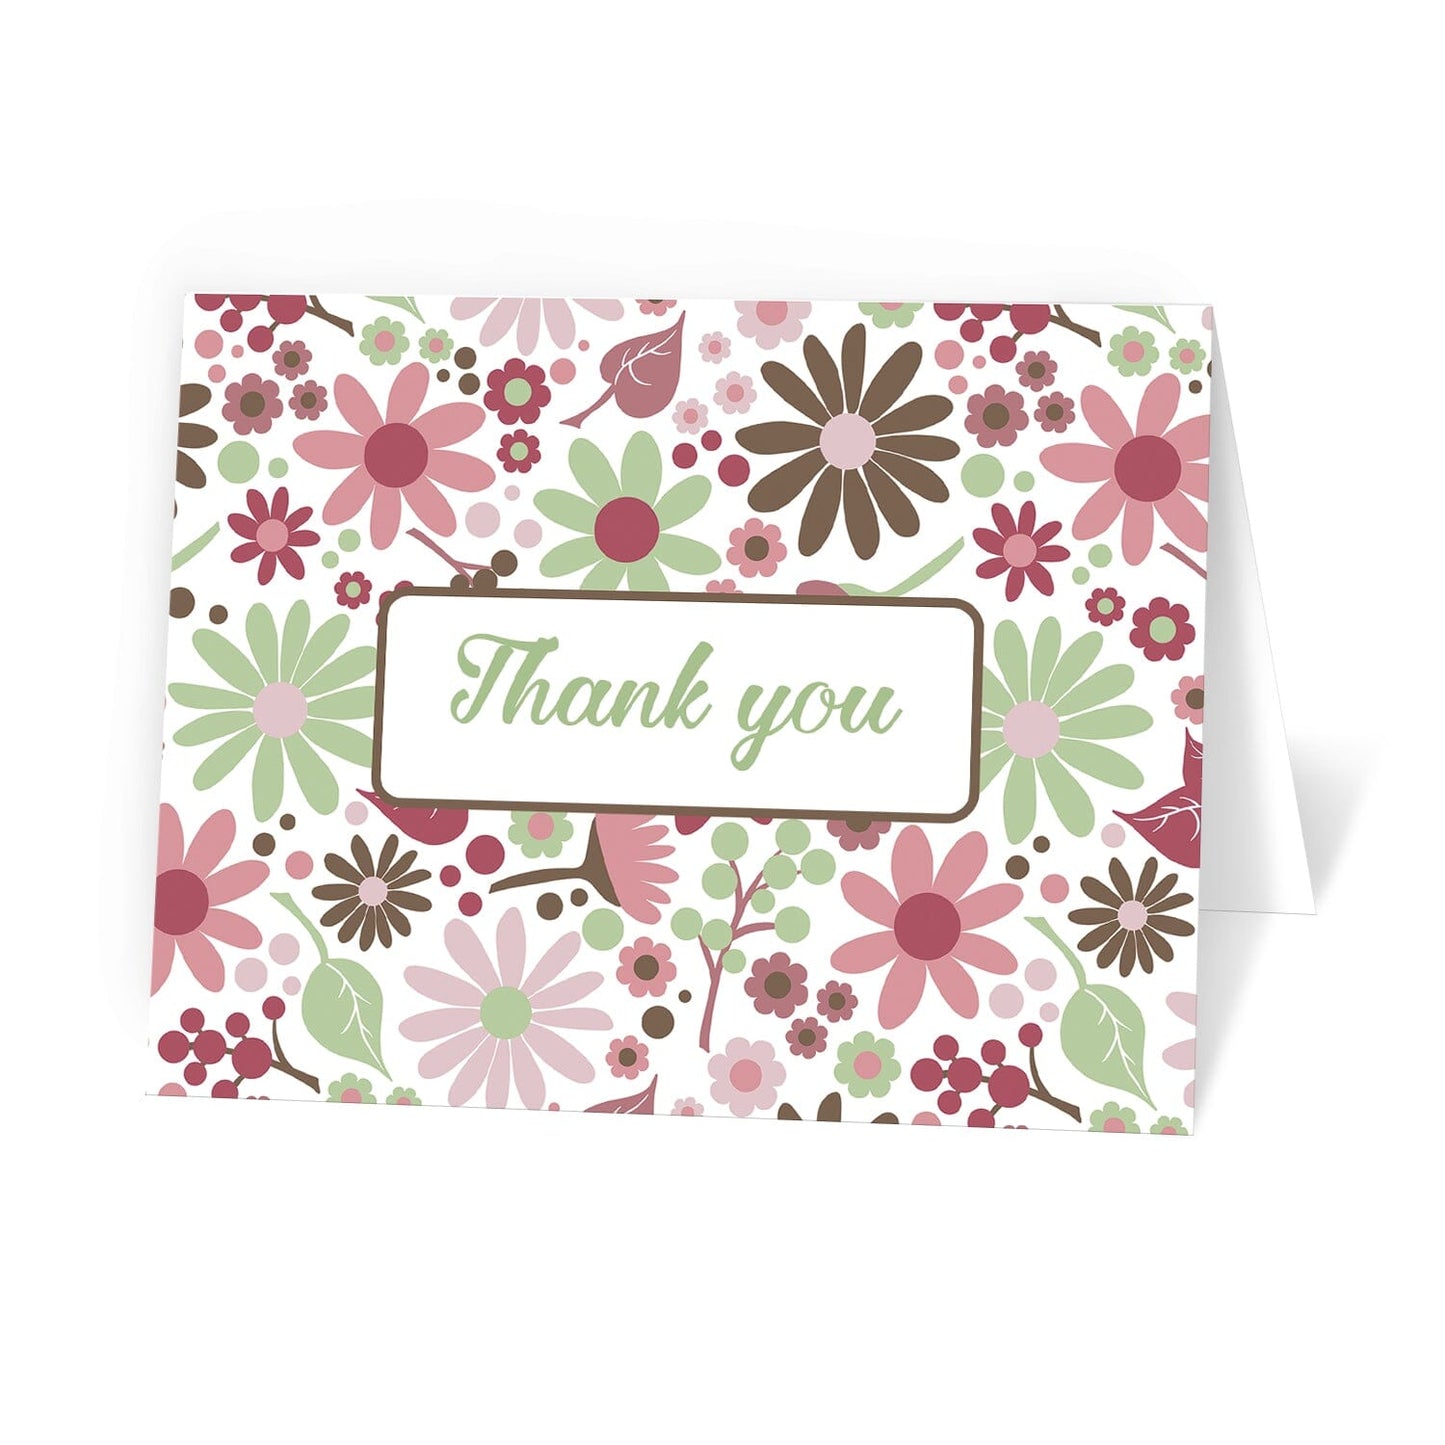 Berry Green Summer Flowers Thank You Cards at Artistically Invited.